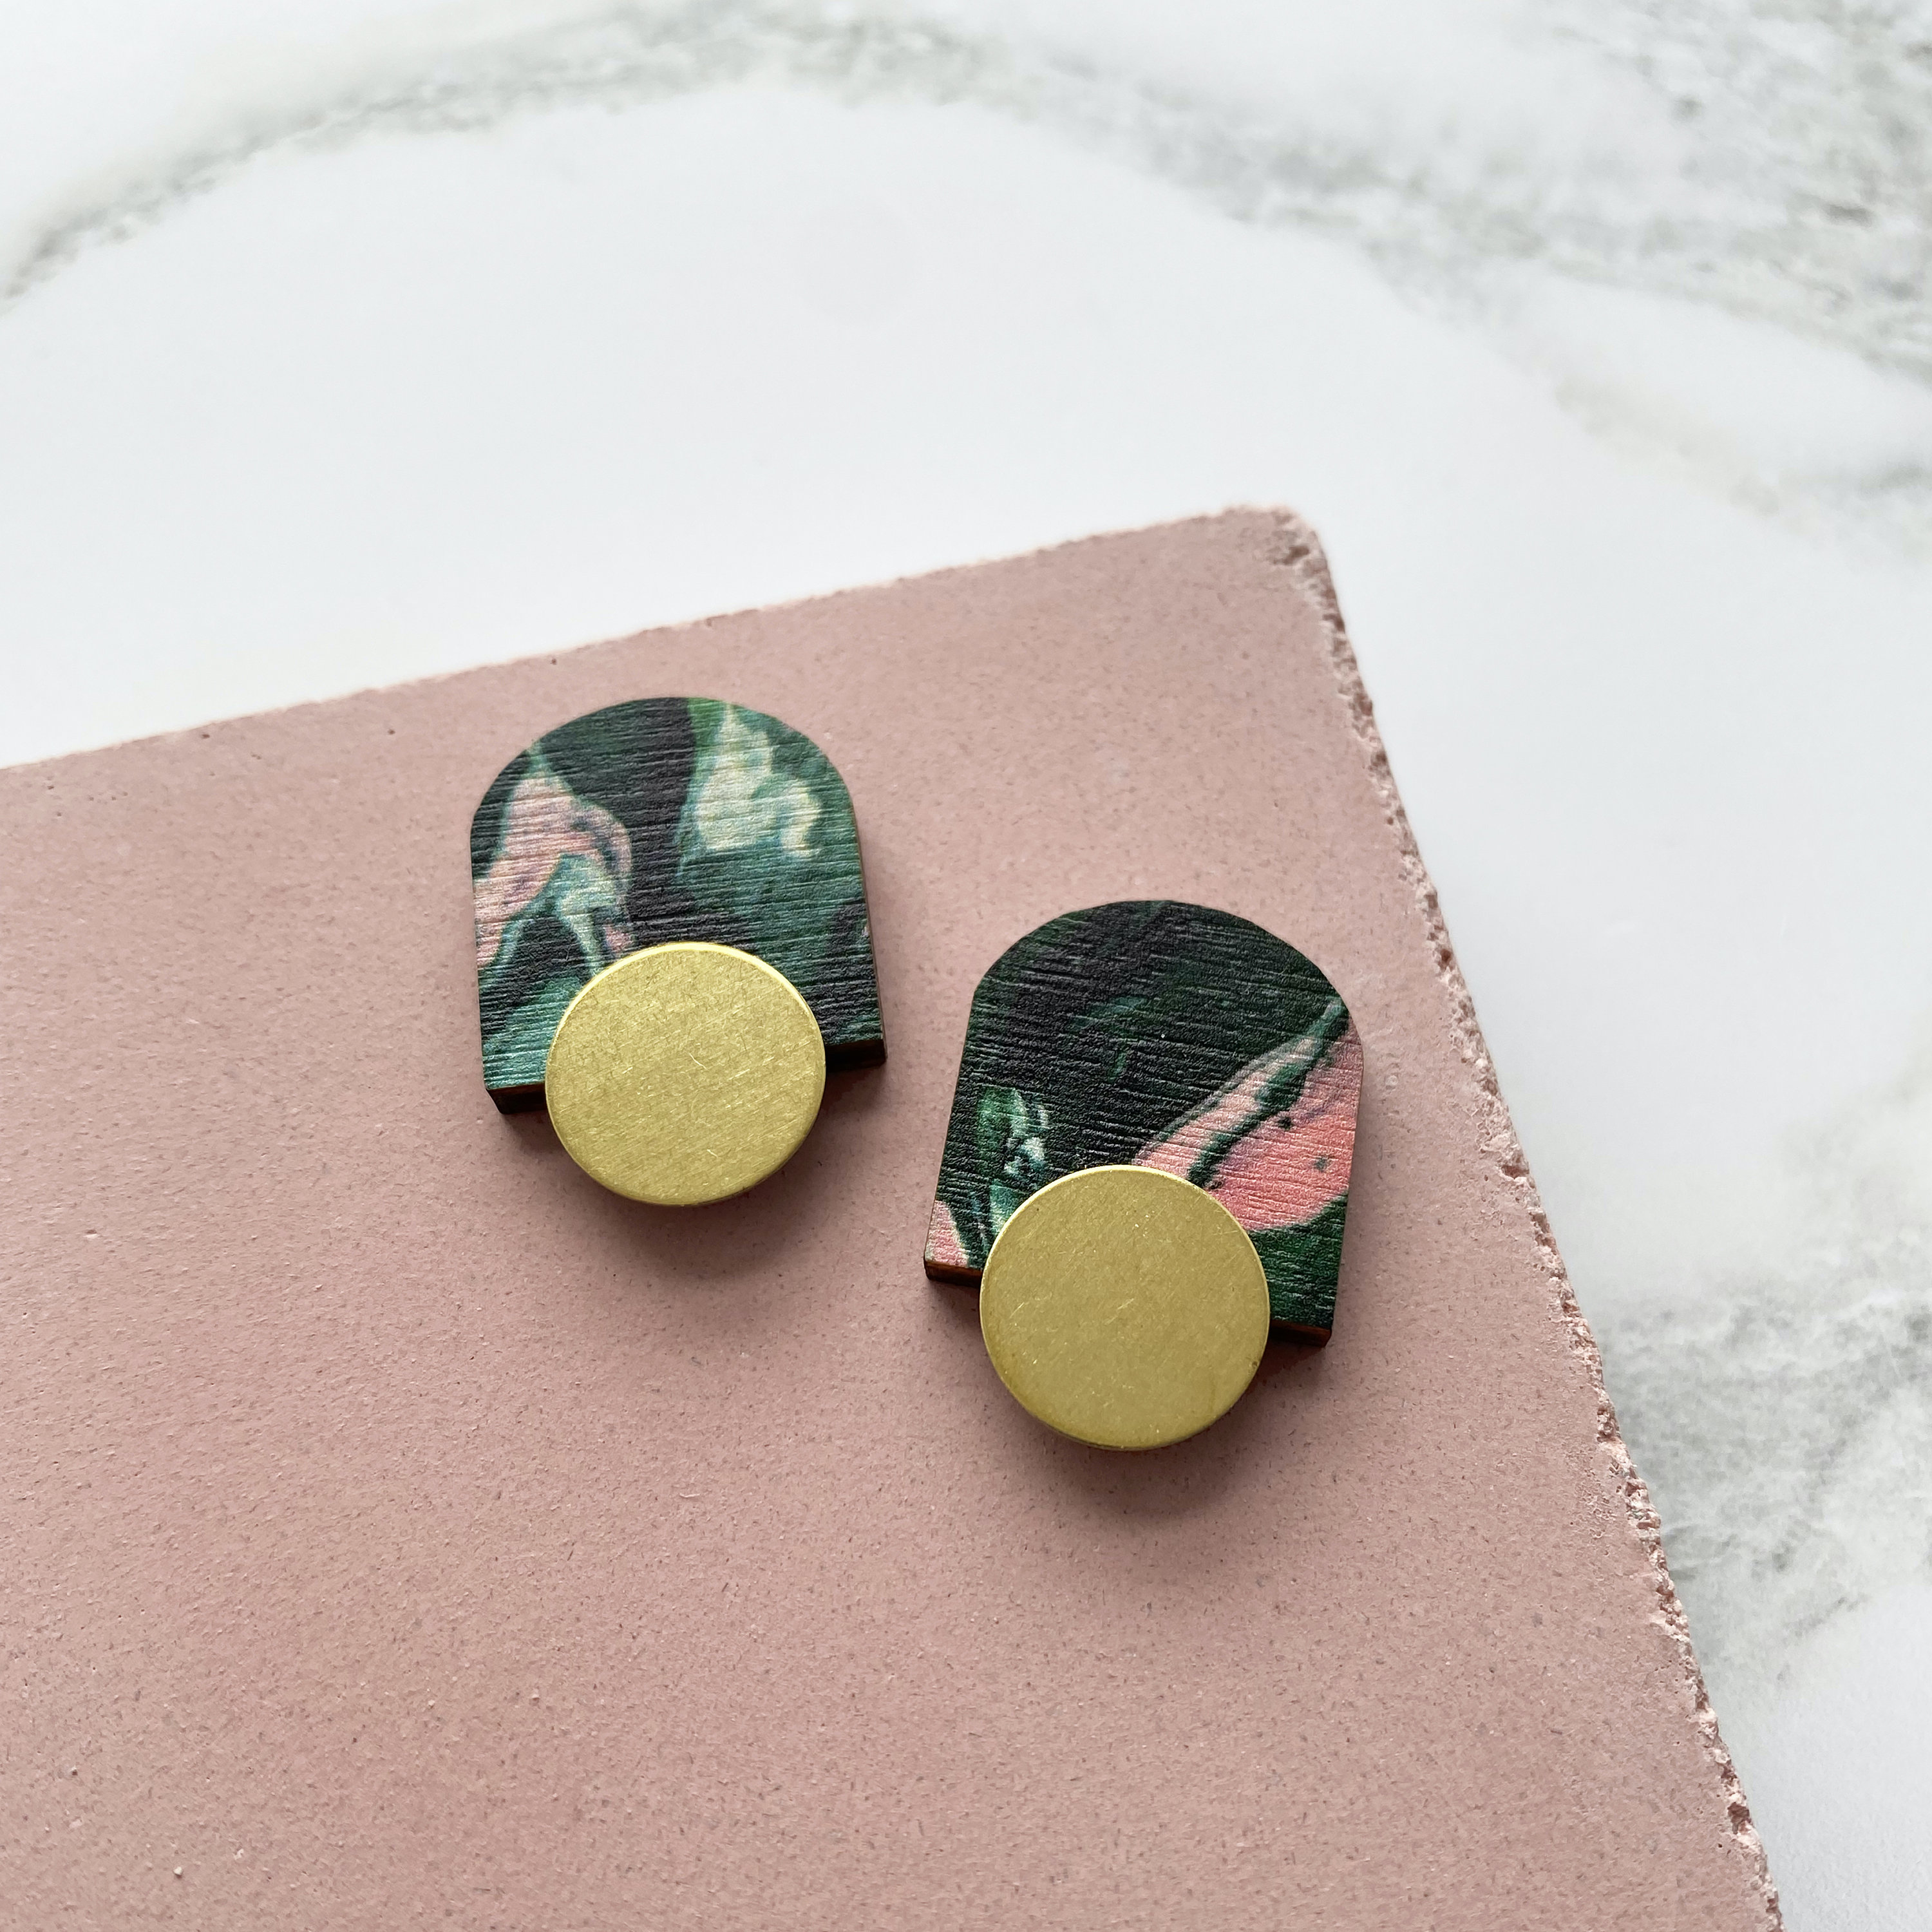 Mini Arc Stud Earrings - Green & Pink Marble Arch Geometric Studs Jewellery Gift For Her Minimal